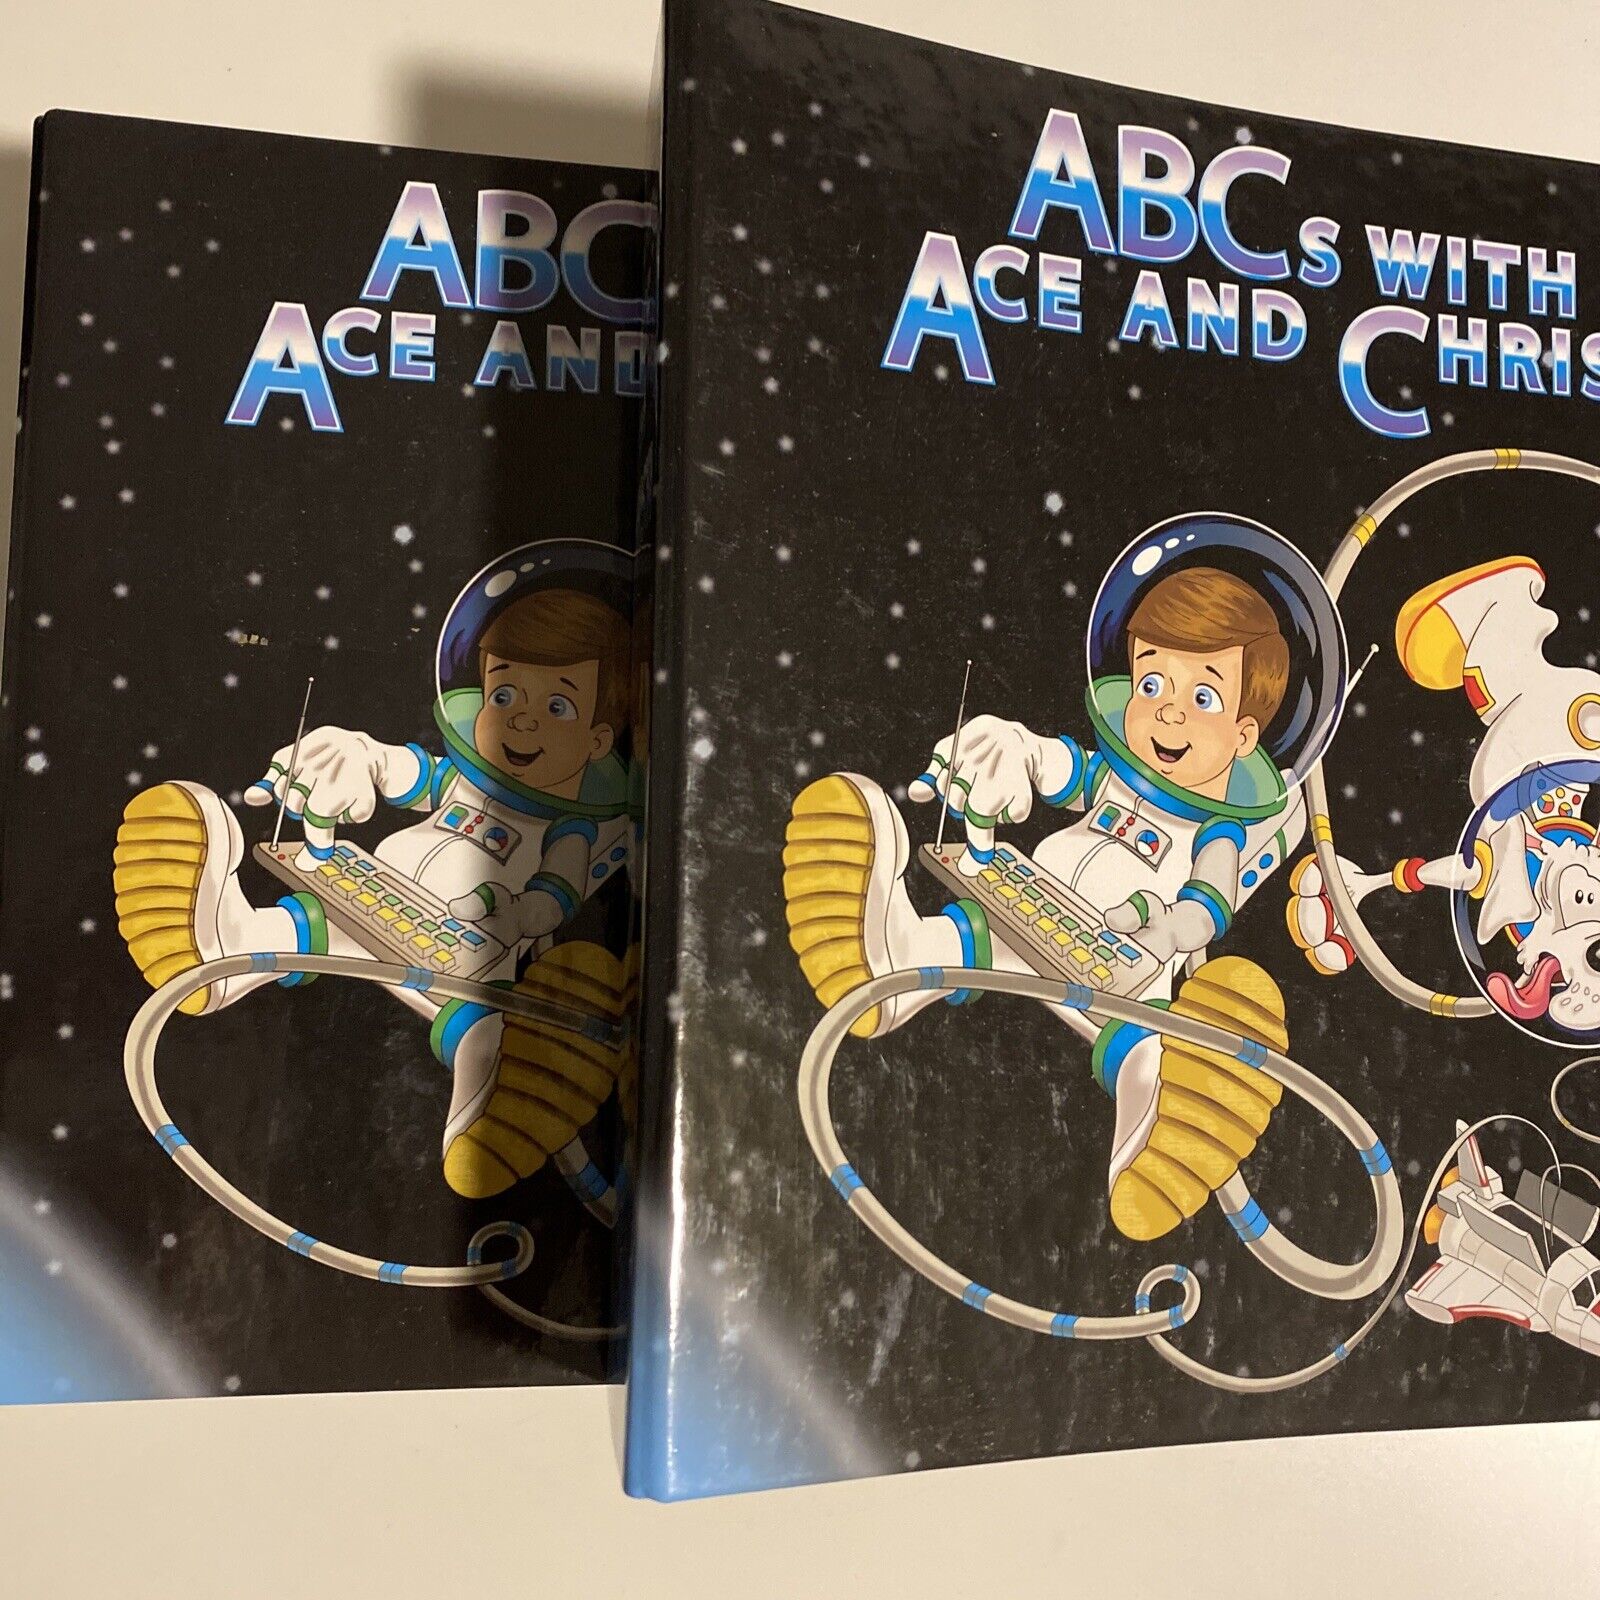 ABCs with ACE and Christi Volume 1-2 Accelerated Christian Education See Descrip